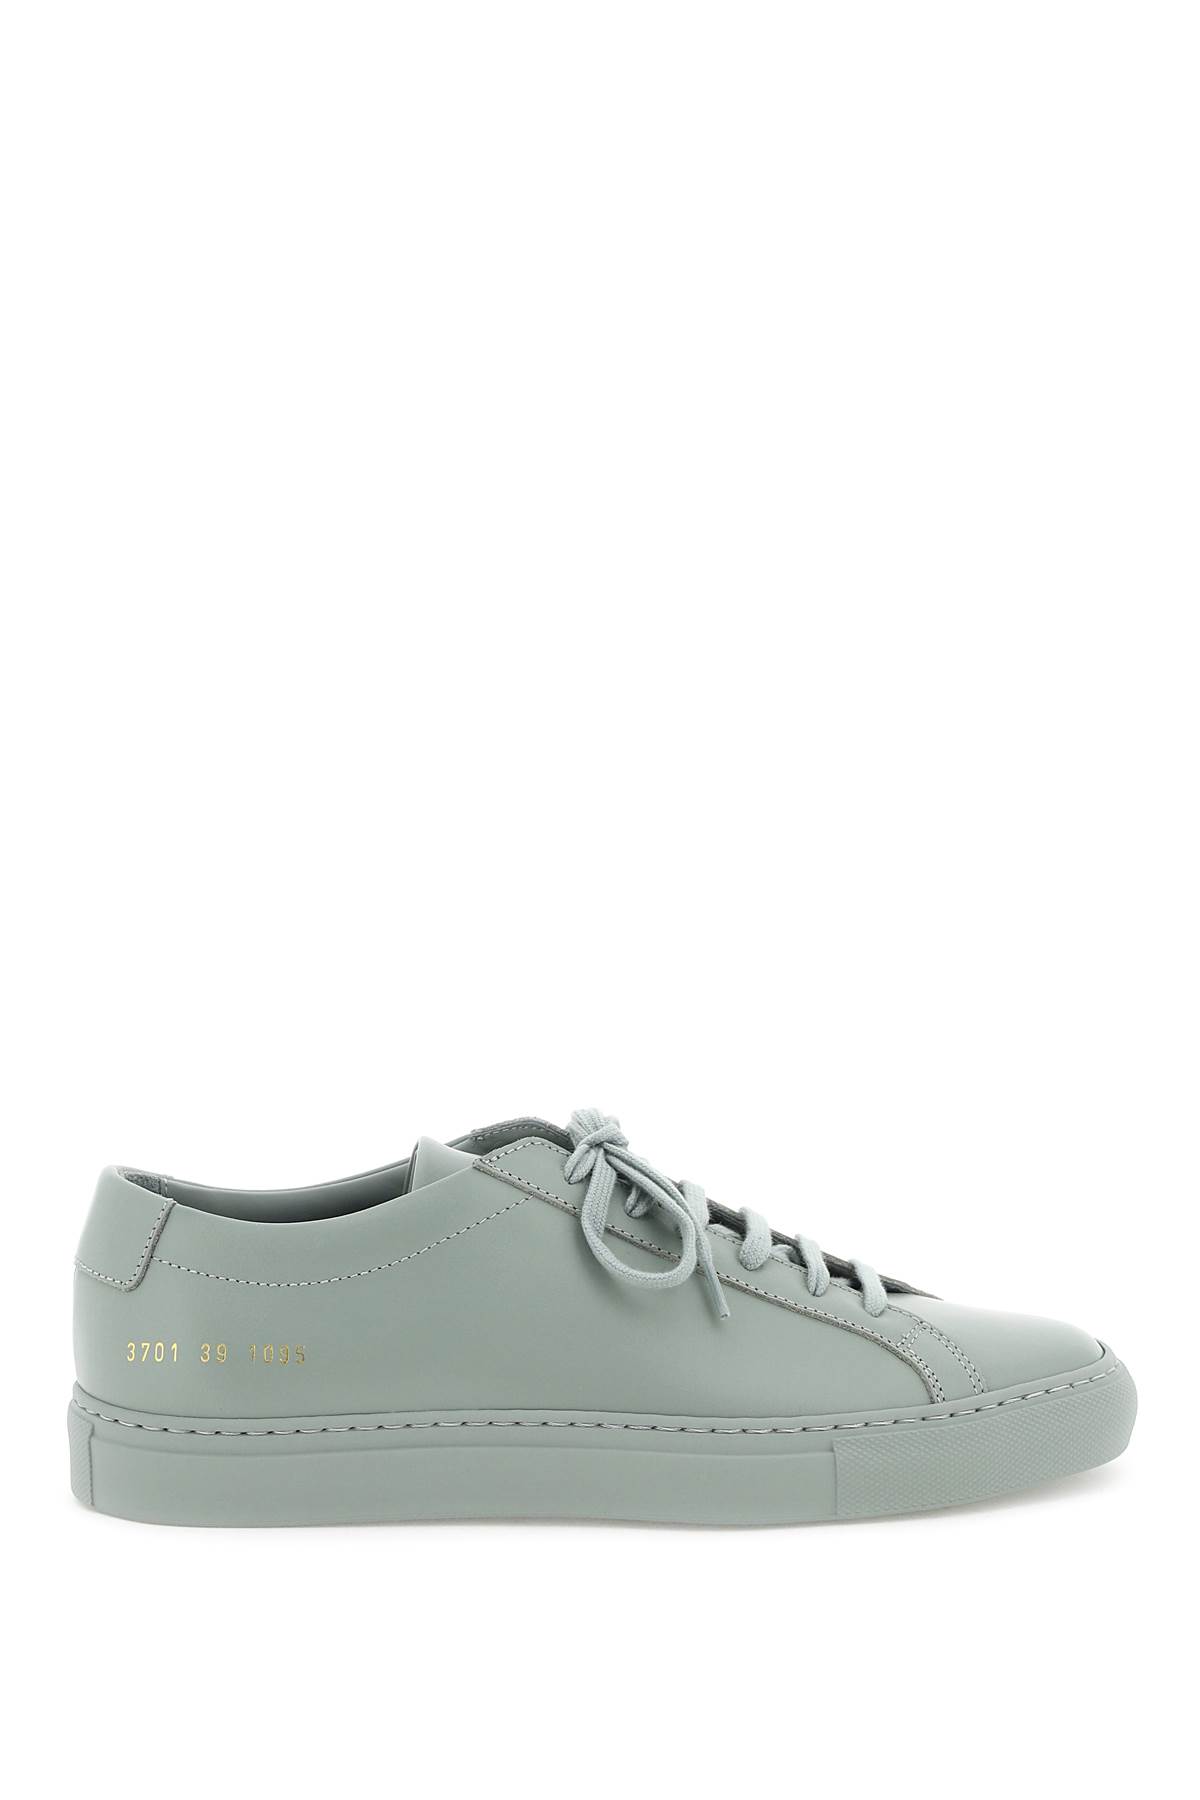 COMMON PROJECTS ORIGINAL ACHILLES LEATHER trainers